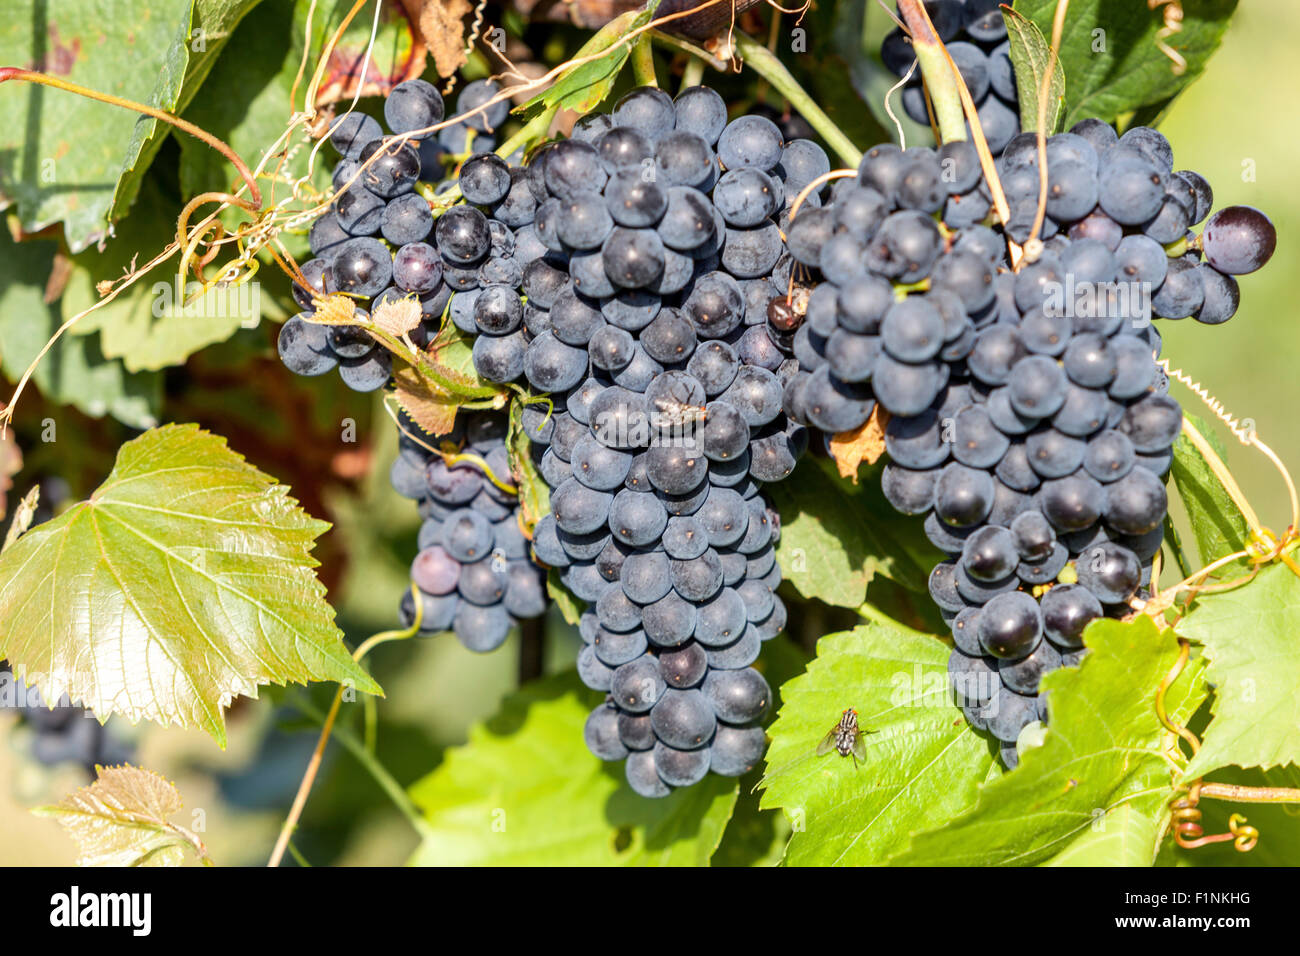 Wine region Valtice, vineyard and grapes, South Moravia, Czech Republic, Europe Stock Photo